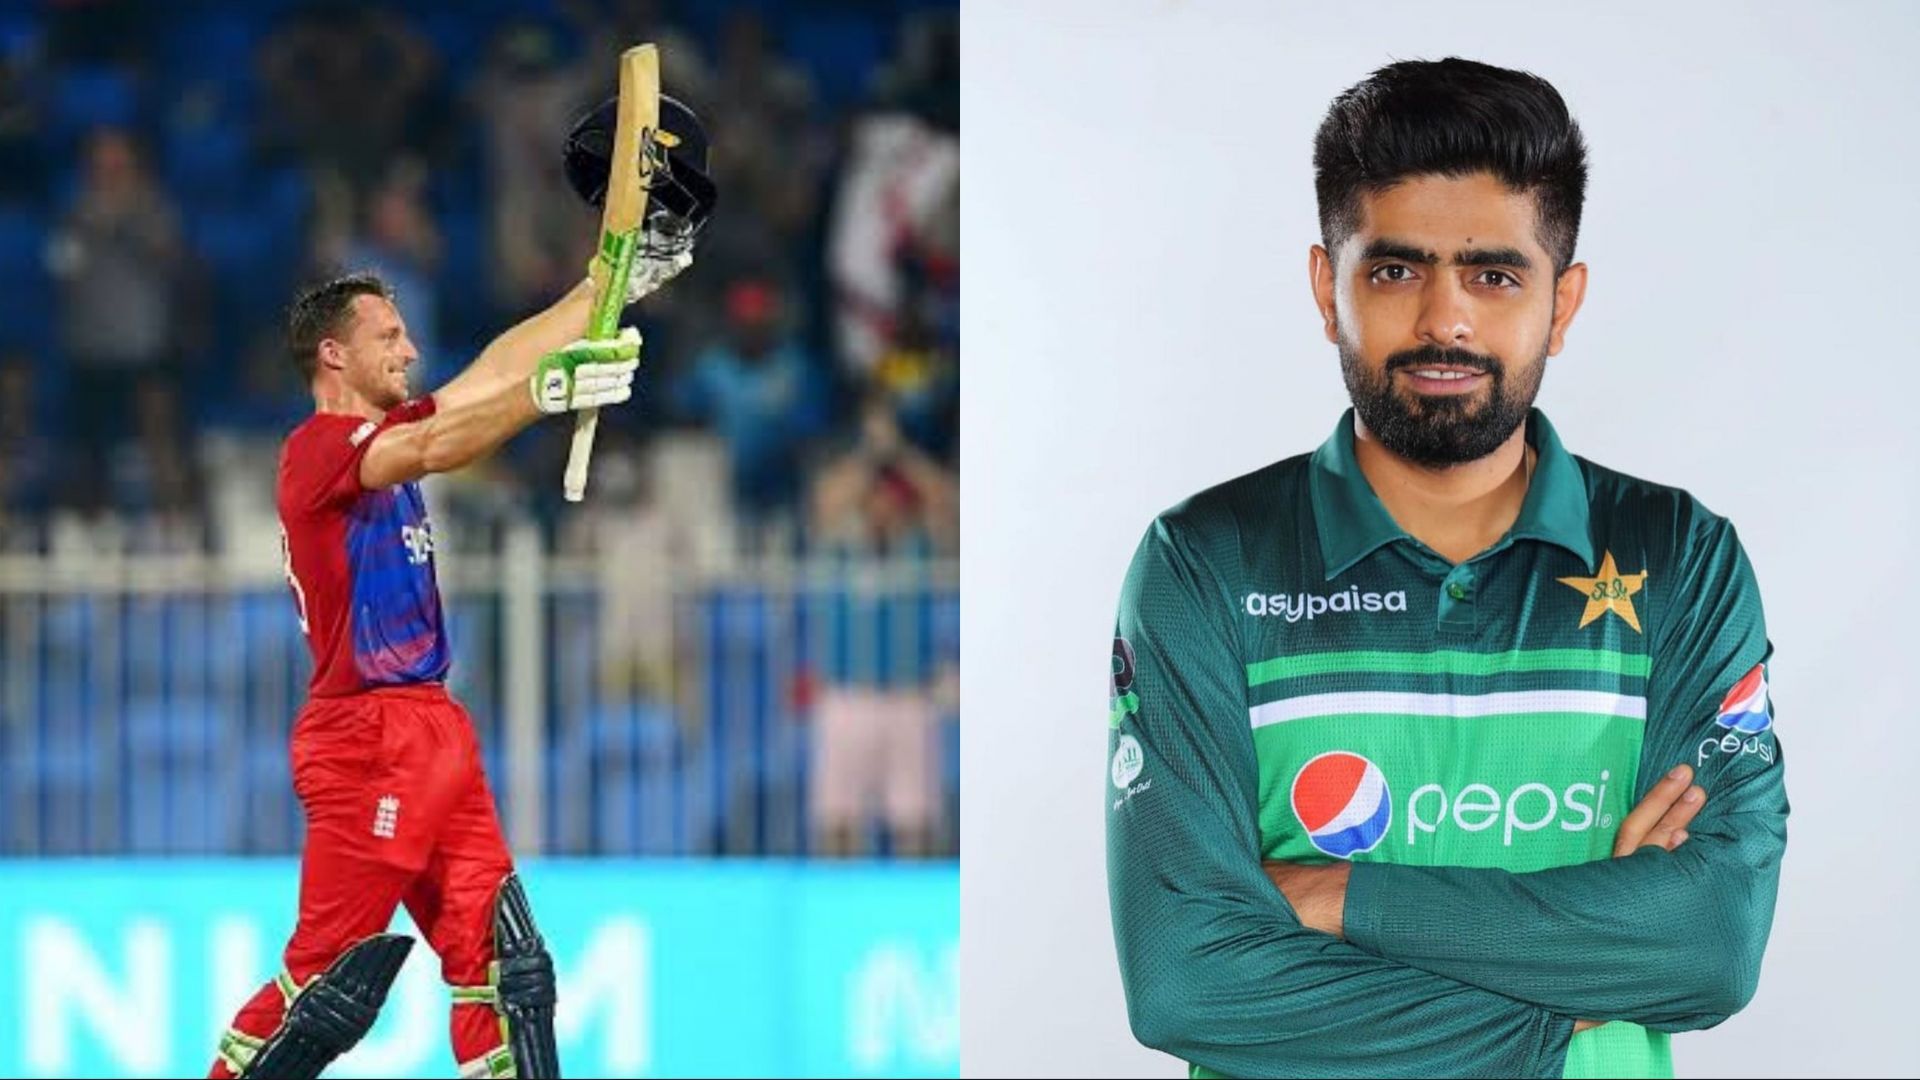 Jos Buttler (L) and Babar Azam were among the top-scorers in T20I cricket this year